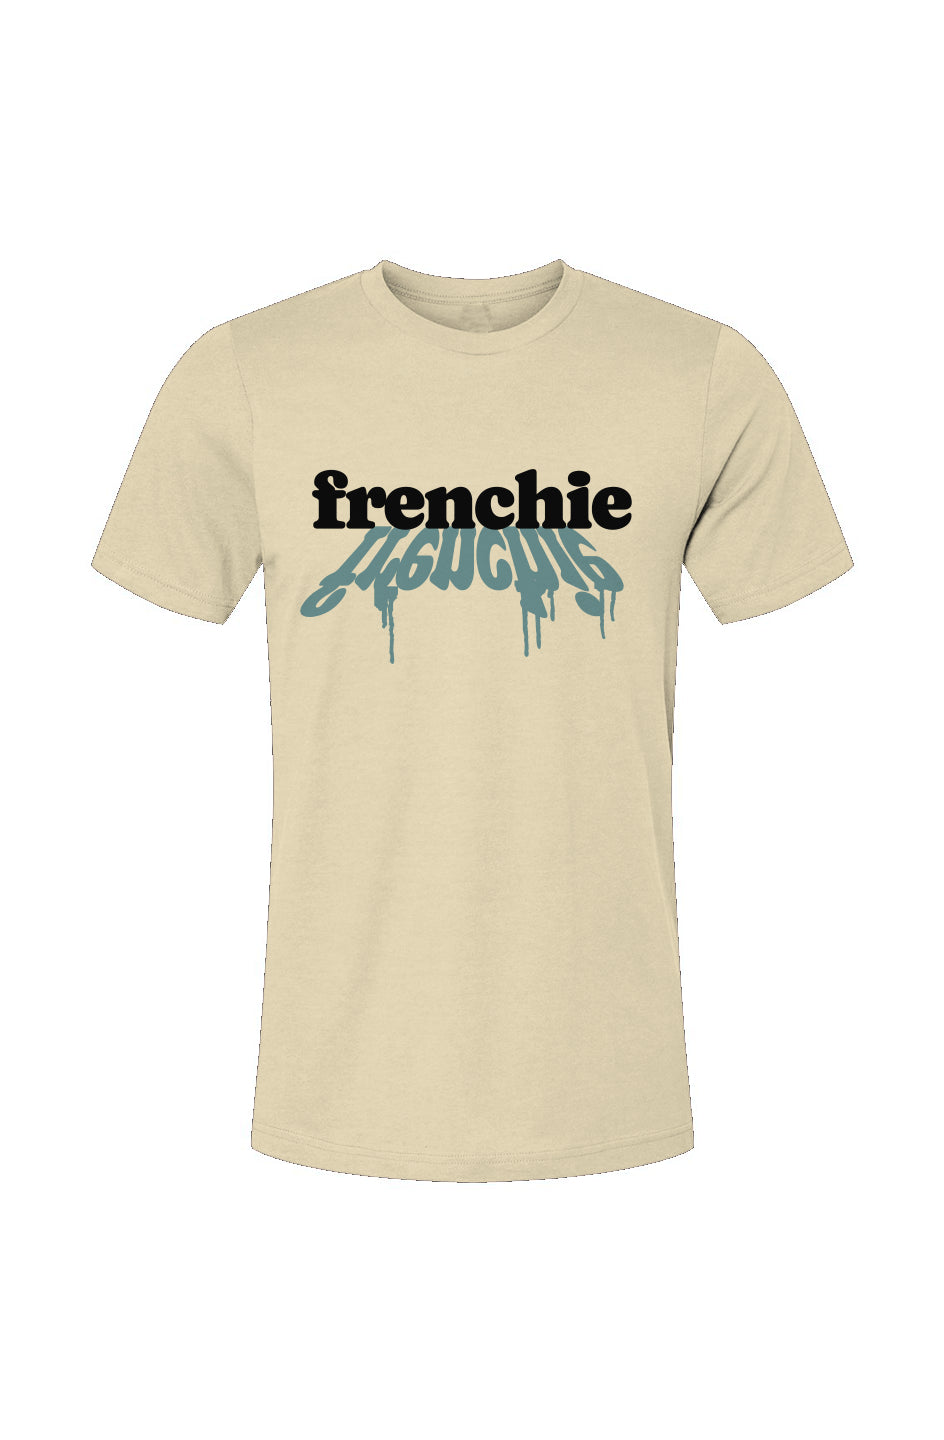 Unisex Jersey T-Shirt-Frenchie Shadow